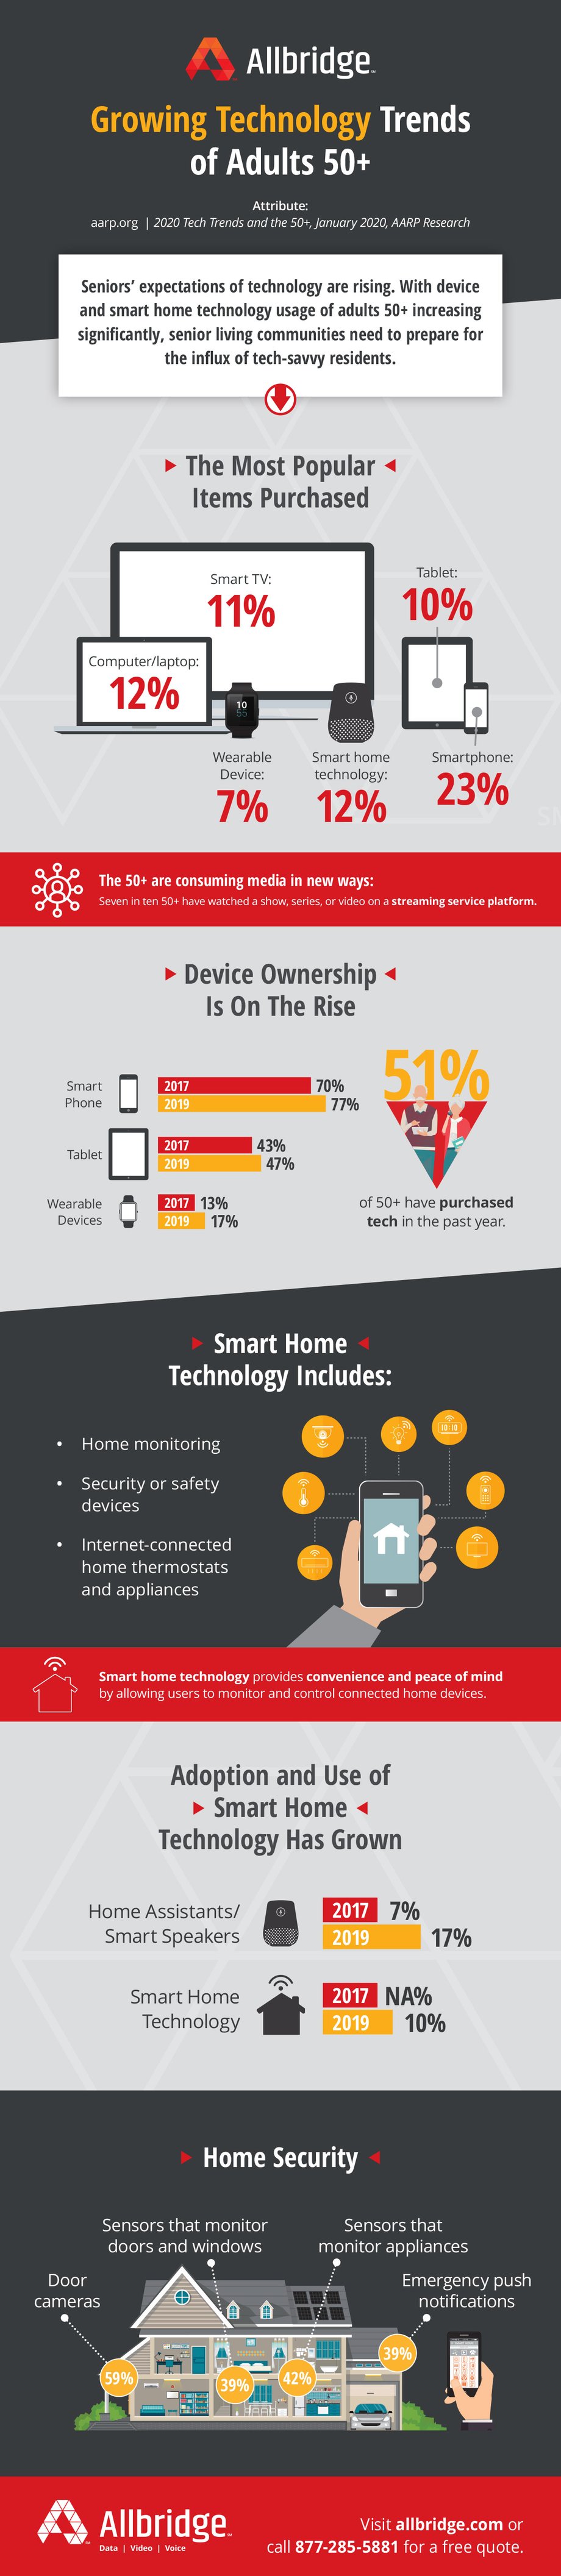 Infographic-Growing-Technology-Trends-of-Adults-50+[1]